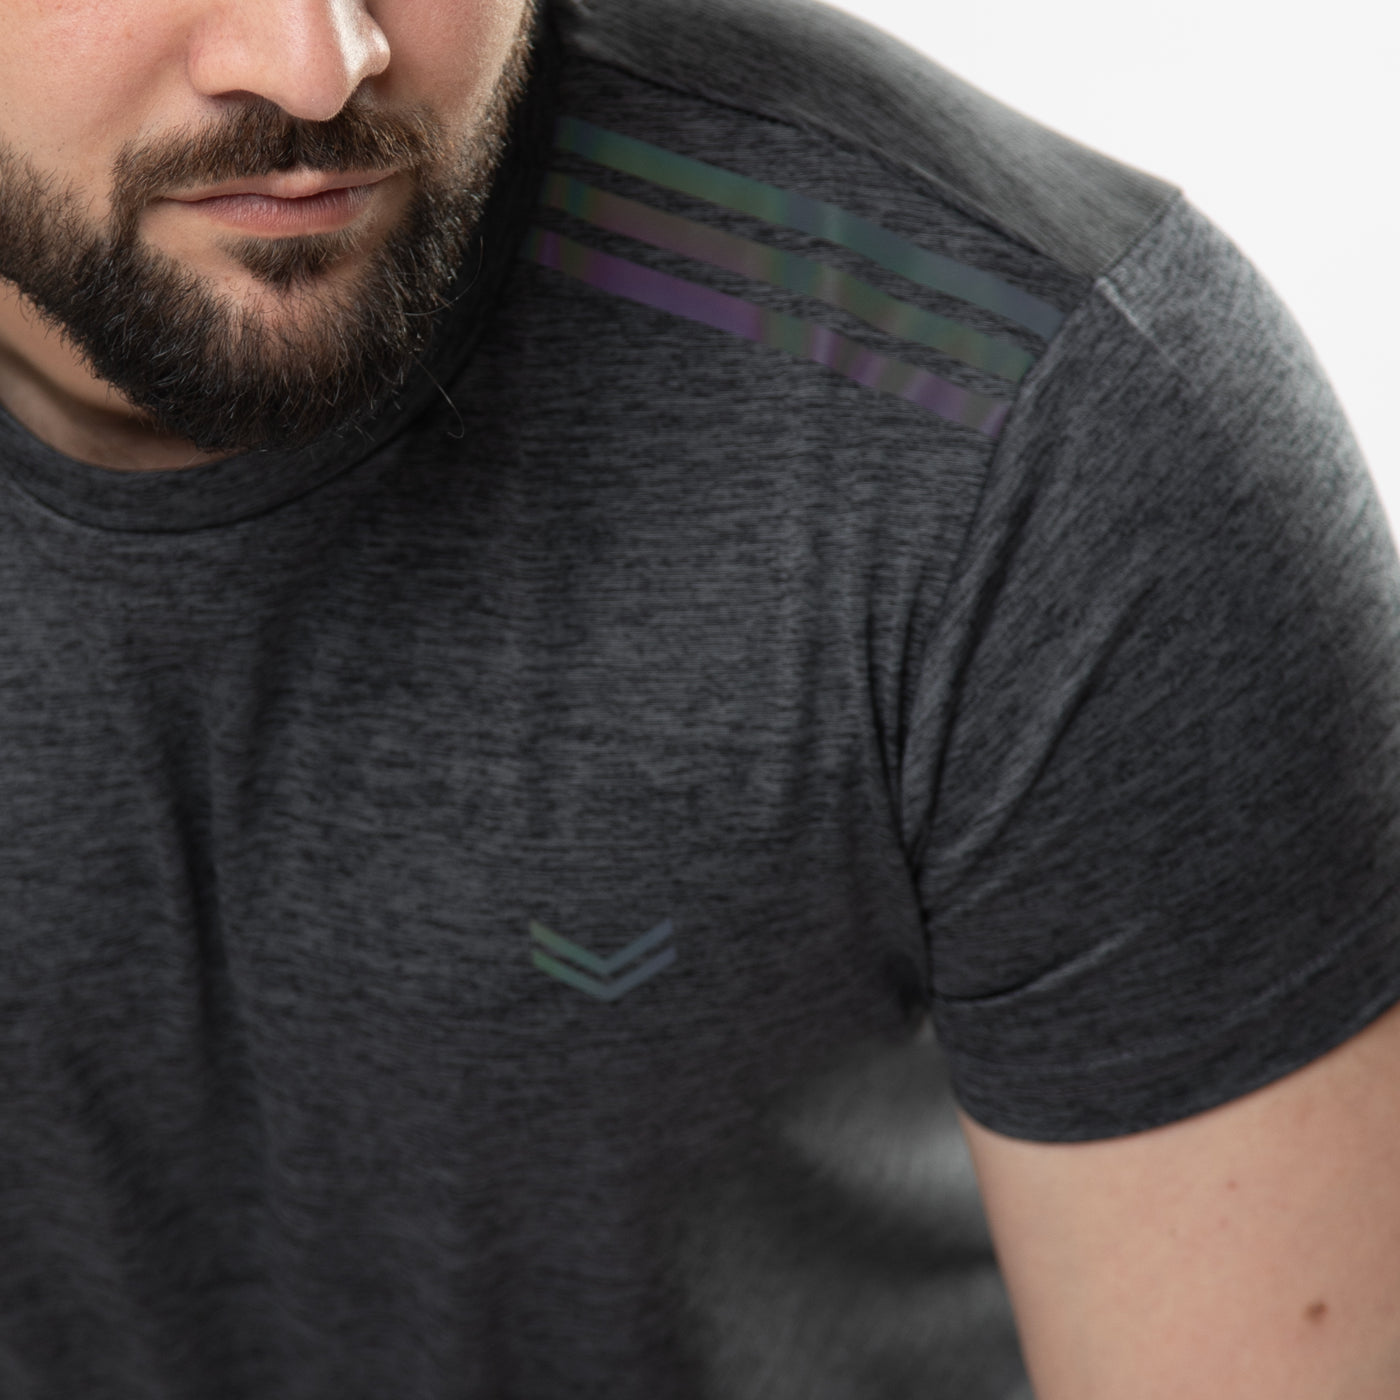 Gray Melange Quick Dry T-Shirt with Carbon Reflective Details